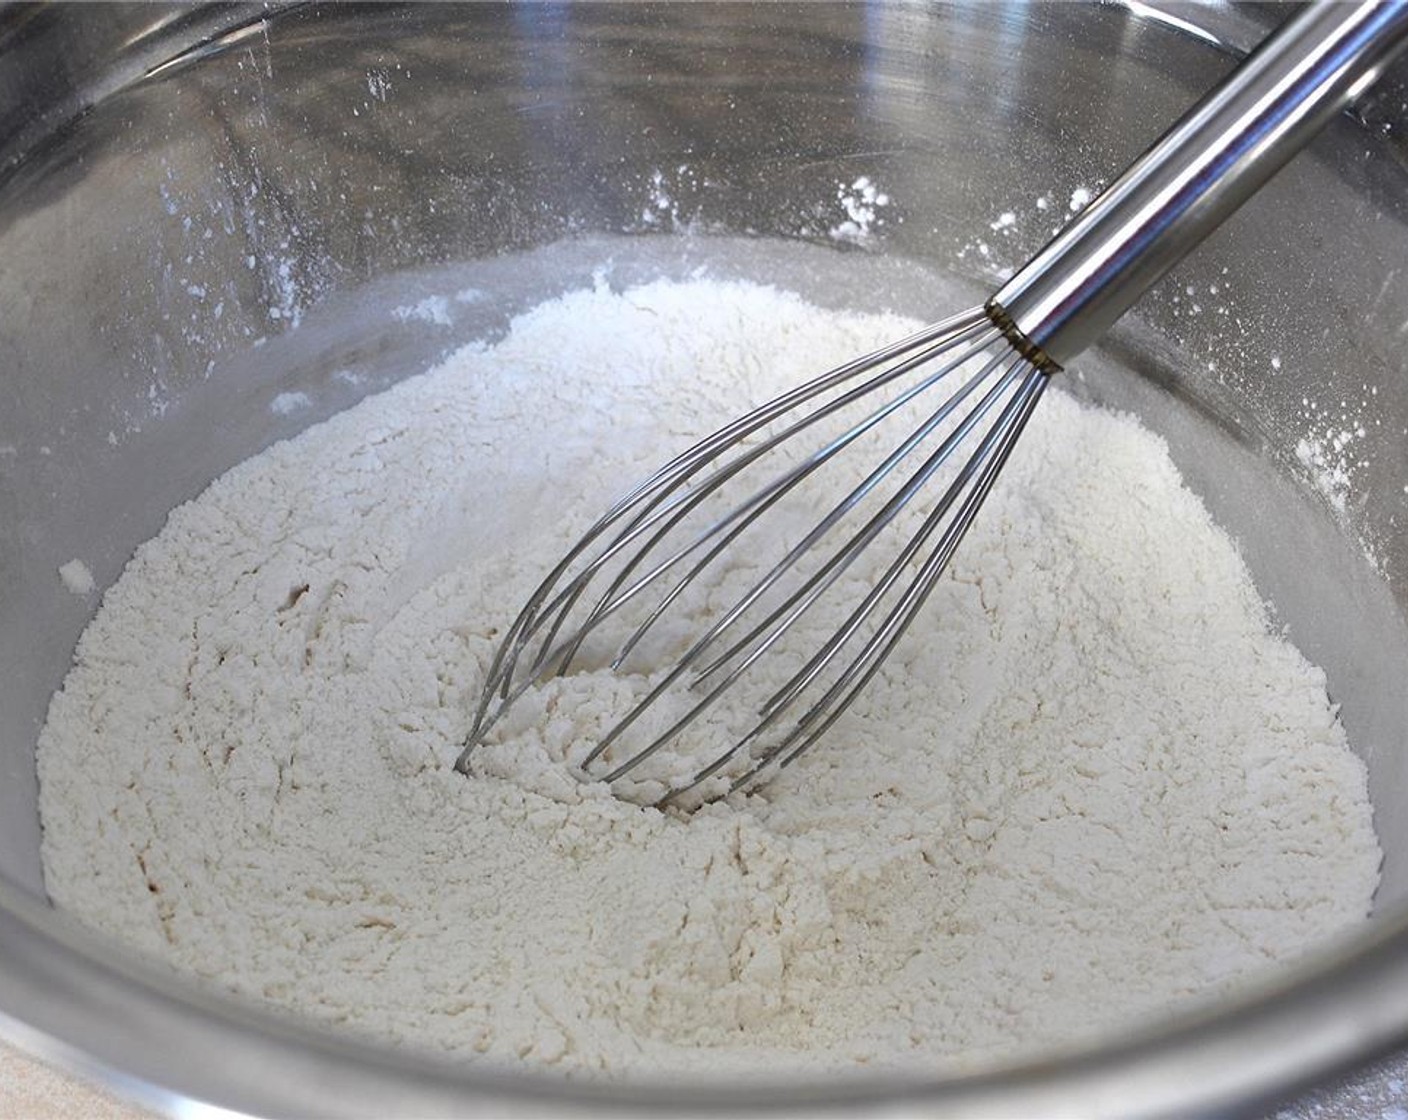 step 1 Preheat oven to 375 degrees F (190 degrees C). In a medium size bowl, mix the dry ingredients: All-Purpose Flour (2 cups), Salt (1/2 tsp) and Baking Soda (1/2 Tbsp) together.